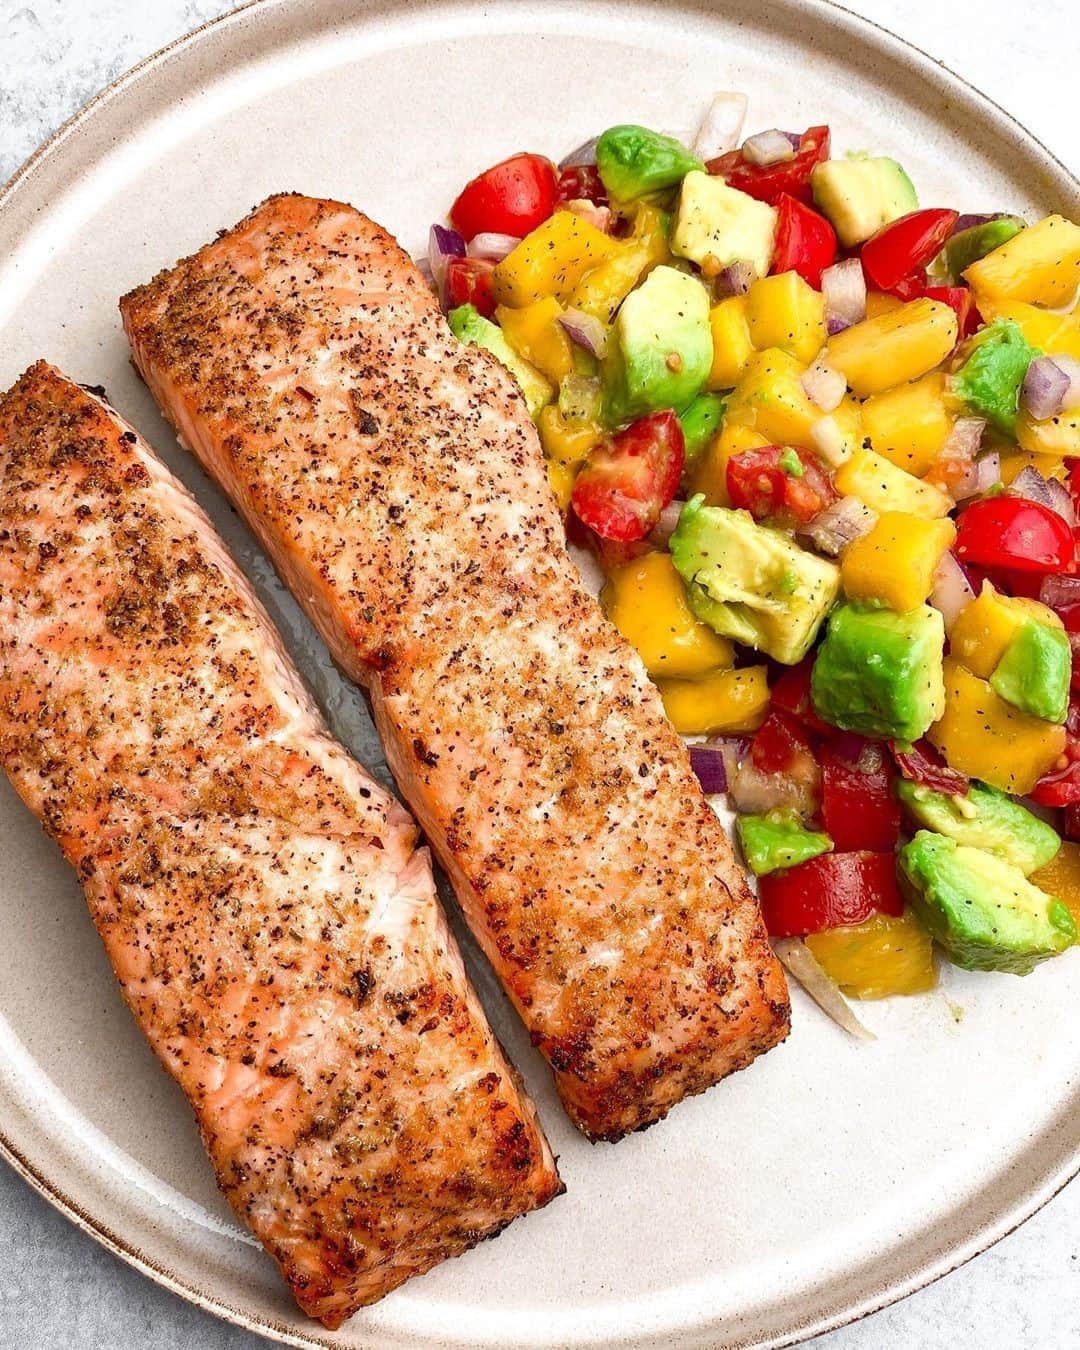 Flavorgod Seasoningsさんのインスタグラム写真 - (Flavorgod SeasoningsInstagram)「Baked Salmon with Mango Avocado Salsa 🌟 ⁣ by customer @mandaameals⁠ ⁣-⁠ Flavor God Seasoning Used: Lemon & Garlic(Perfect for Salmon)⁠ -⁠ Add delicious flavors to your meals!⬇️⁠ Click link in the bio -> @flavorgod  www.flavorgod.com⁠ -⁠ Ingredients: ⁣⁠ Salmon fillets ⁣⁠ 1 mango ⁣⁠ 2 avocados ⁣⁠ 1/4 of a medium red onion⁣⁠ Cherry tomatoes ⁣⁠ 1/2 of a lemon, juiced ⁣⁠ 1/2 of a lime, juiced ⁣⁠ ⁣⁠ Directions: ⁣⁠ • Start with your salsa. Chop your red onions & cherry tomatoes, then add to a large bowl. Add in diced avocado and mango 🥭 as well. Squeeze lemon & lime and add your salt & pepper for seasoning. Mix well. Let chill in fridge while salmon is being made. ⁣⁠ • Preheat oven to 450°⁣⁠ • Season your salmon - salt, pepper, and @flavorgod Lemon & Garlic Seasoning on both sides. Place fillets skin side down, on a baking sheet lined with parchment paper & then drizzle olive oil on top. Bake for 13-15mins. Once done, you can squeeze lemon juice on top for extra flavor! ⁣⁠ ⁣⁠ Ugh, so delicious. I always make salmon this way and it always comes out perfectly and the skin gets crispy! Love it 🤩 and this salsa pairs with it perfectly. A perfect meal to end the summer with. ⁣⁠ -⁠ Flavor God Seasonings are:⁠ 💥ZERO CALORIES PER SERVING⁠ 🔥0 SUGAR PER SERVING ⁠ 💥GLUTEN FREE⁠ 🔥KETO FRIENDLY⁠ 💥PALEO FRIENDLY⁠ -⁠ #food #foodie #flavorgod #seasonings #glutenfree #mealprep #seasonings #breakfast #lunch #dinner #yummy #delicious #foodporn」9月13日 8時01分 - flavorgod